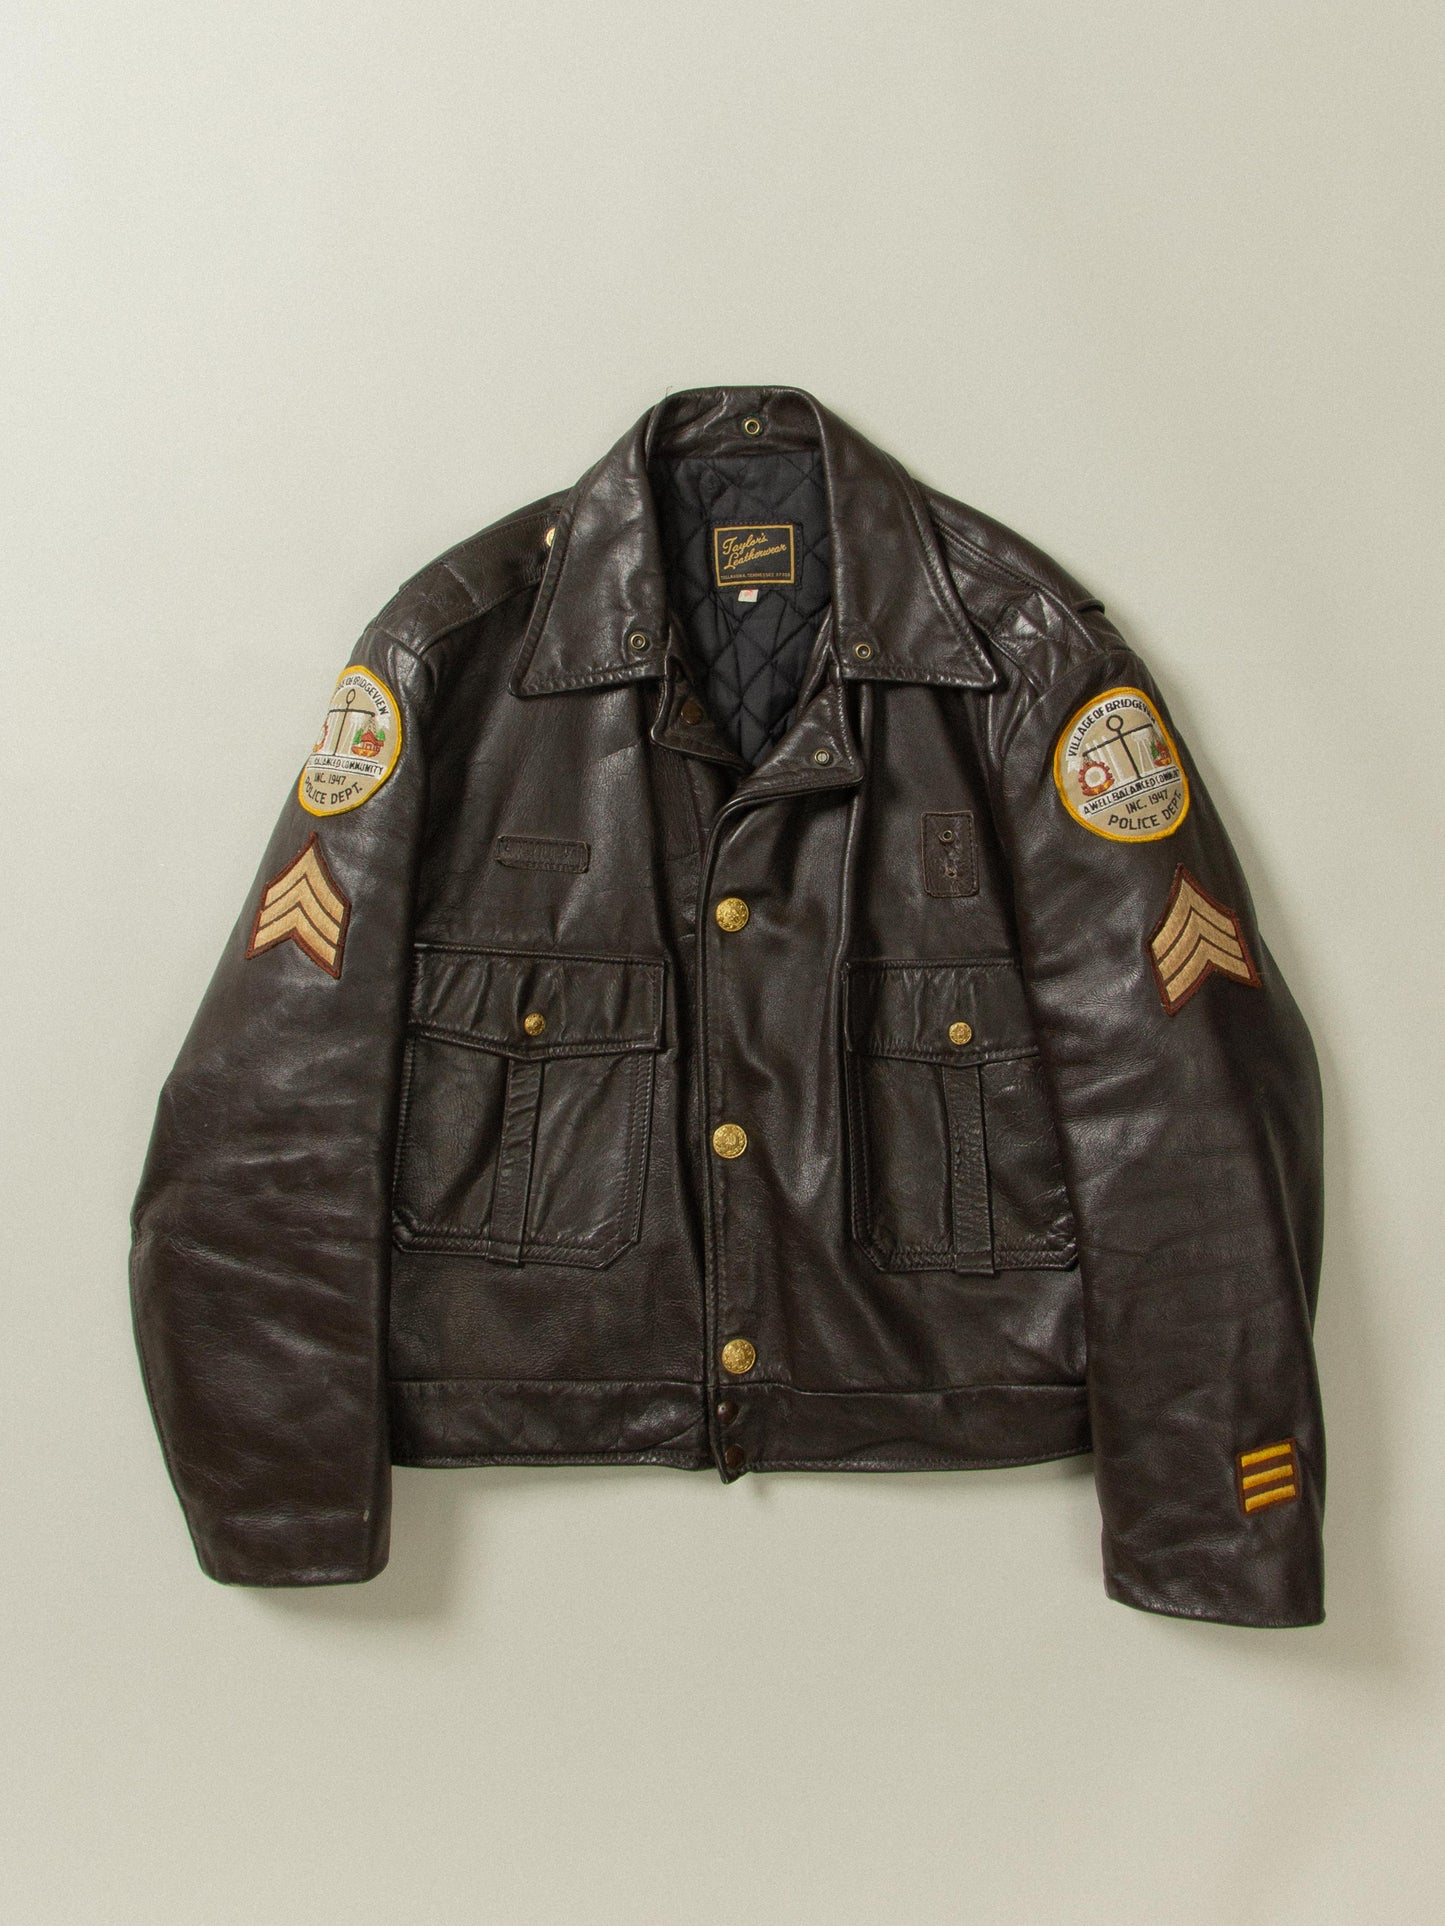 Vtg 1970s Bridgeview Police Leather Jacket - Made in USA (US 44)